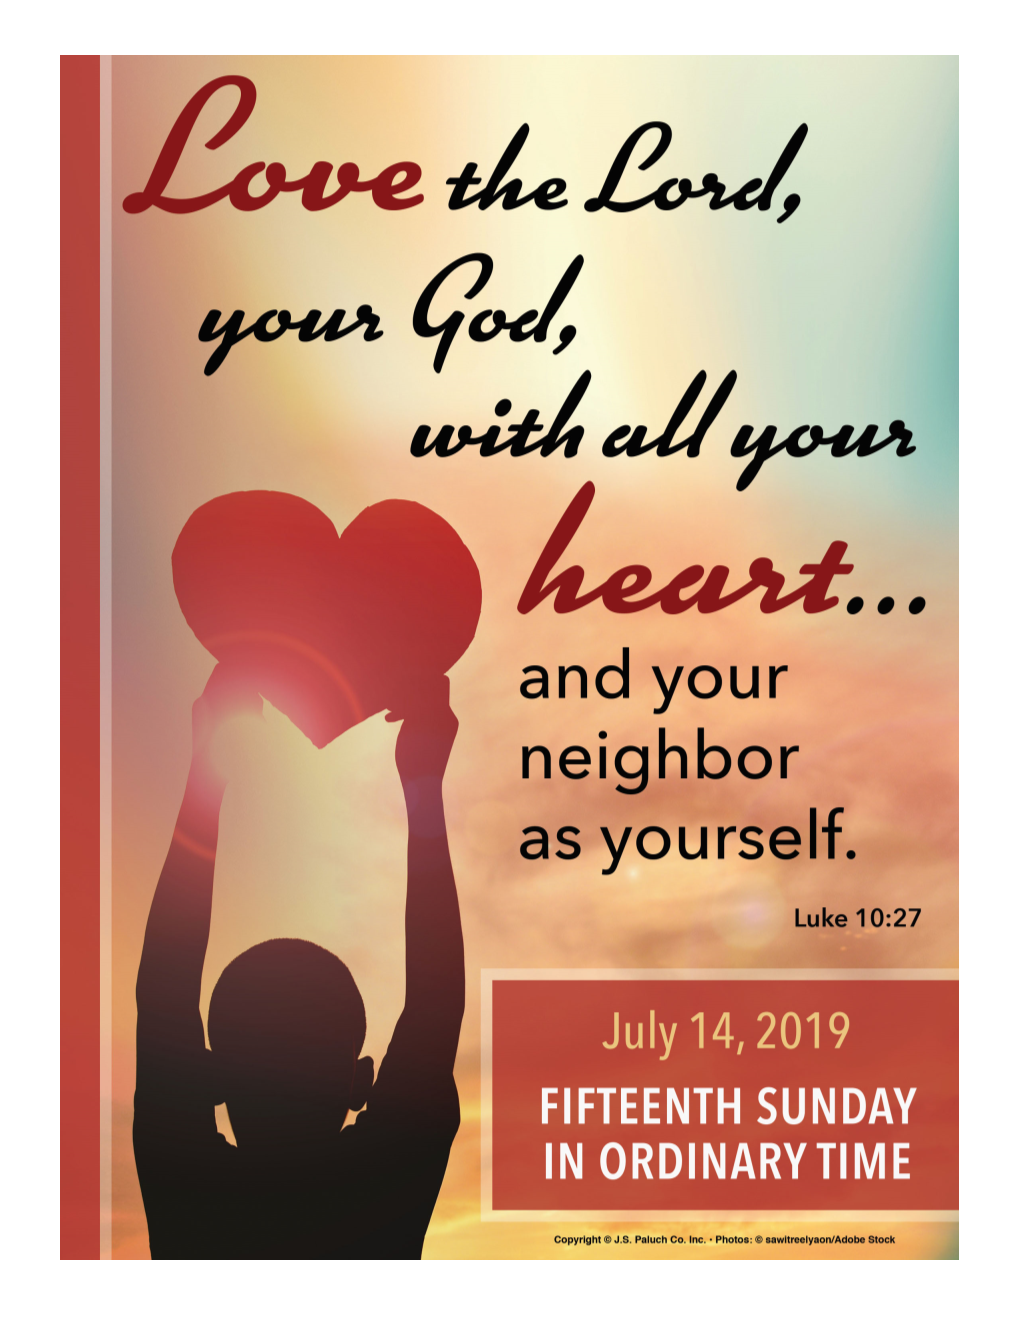 July 14, 2019 Fifteenth Sunday in Ordinary Time